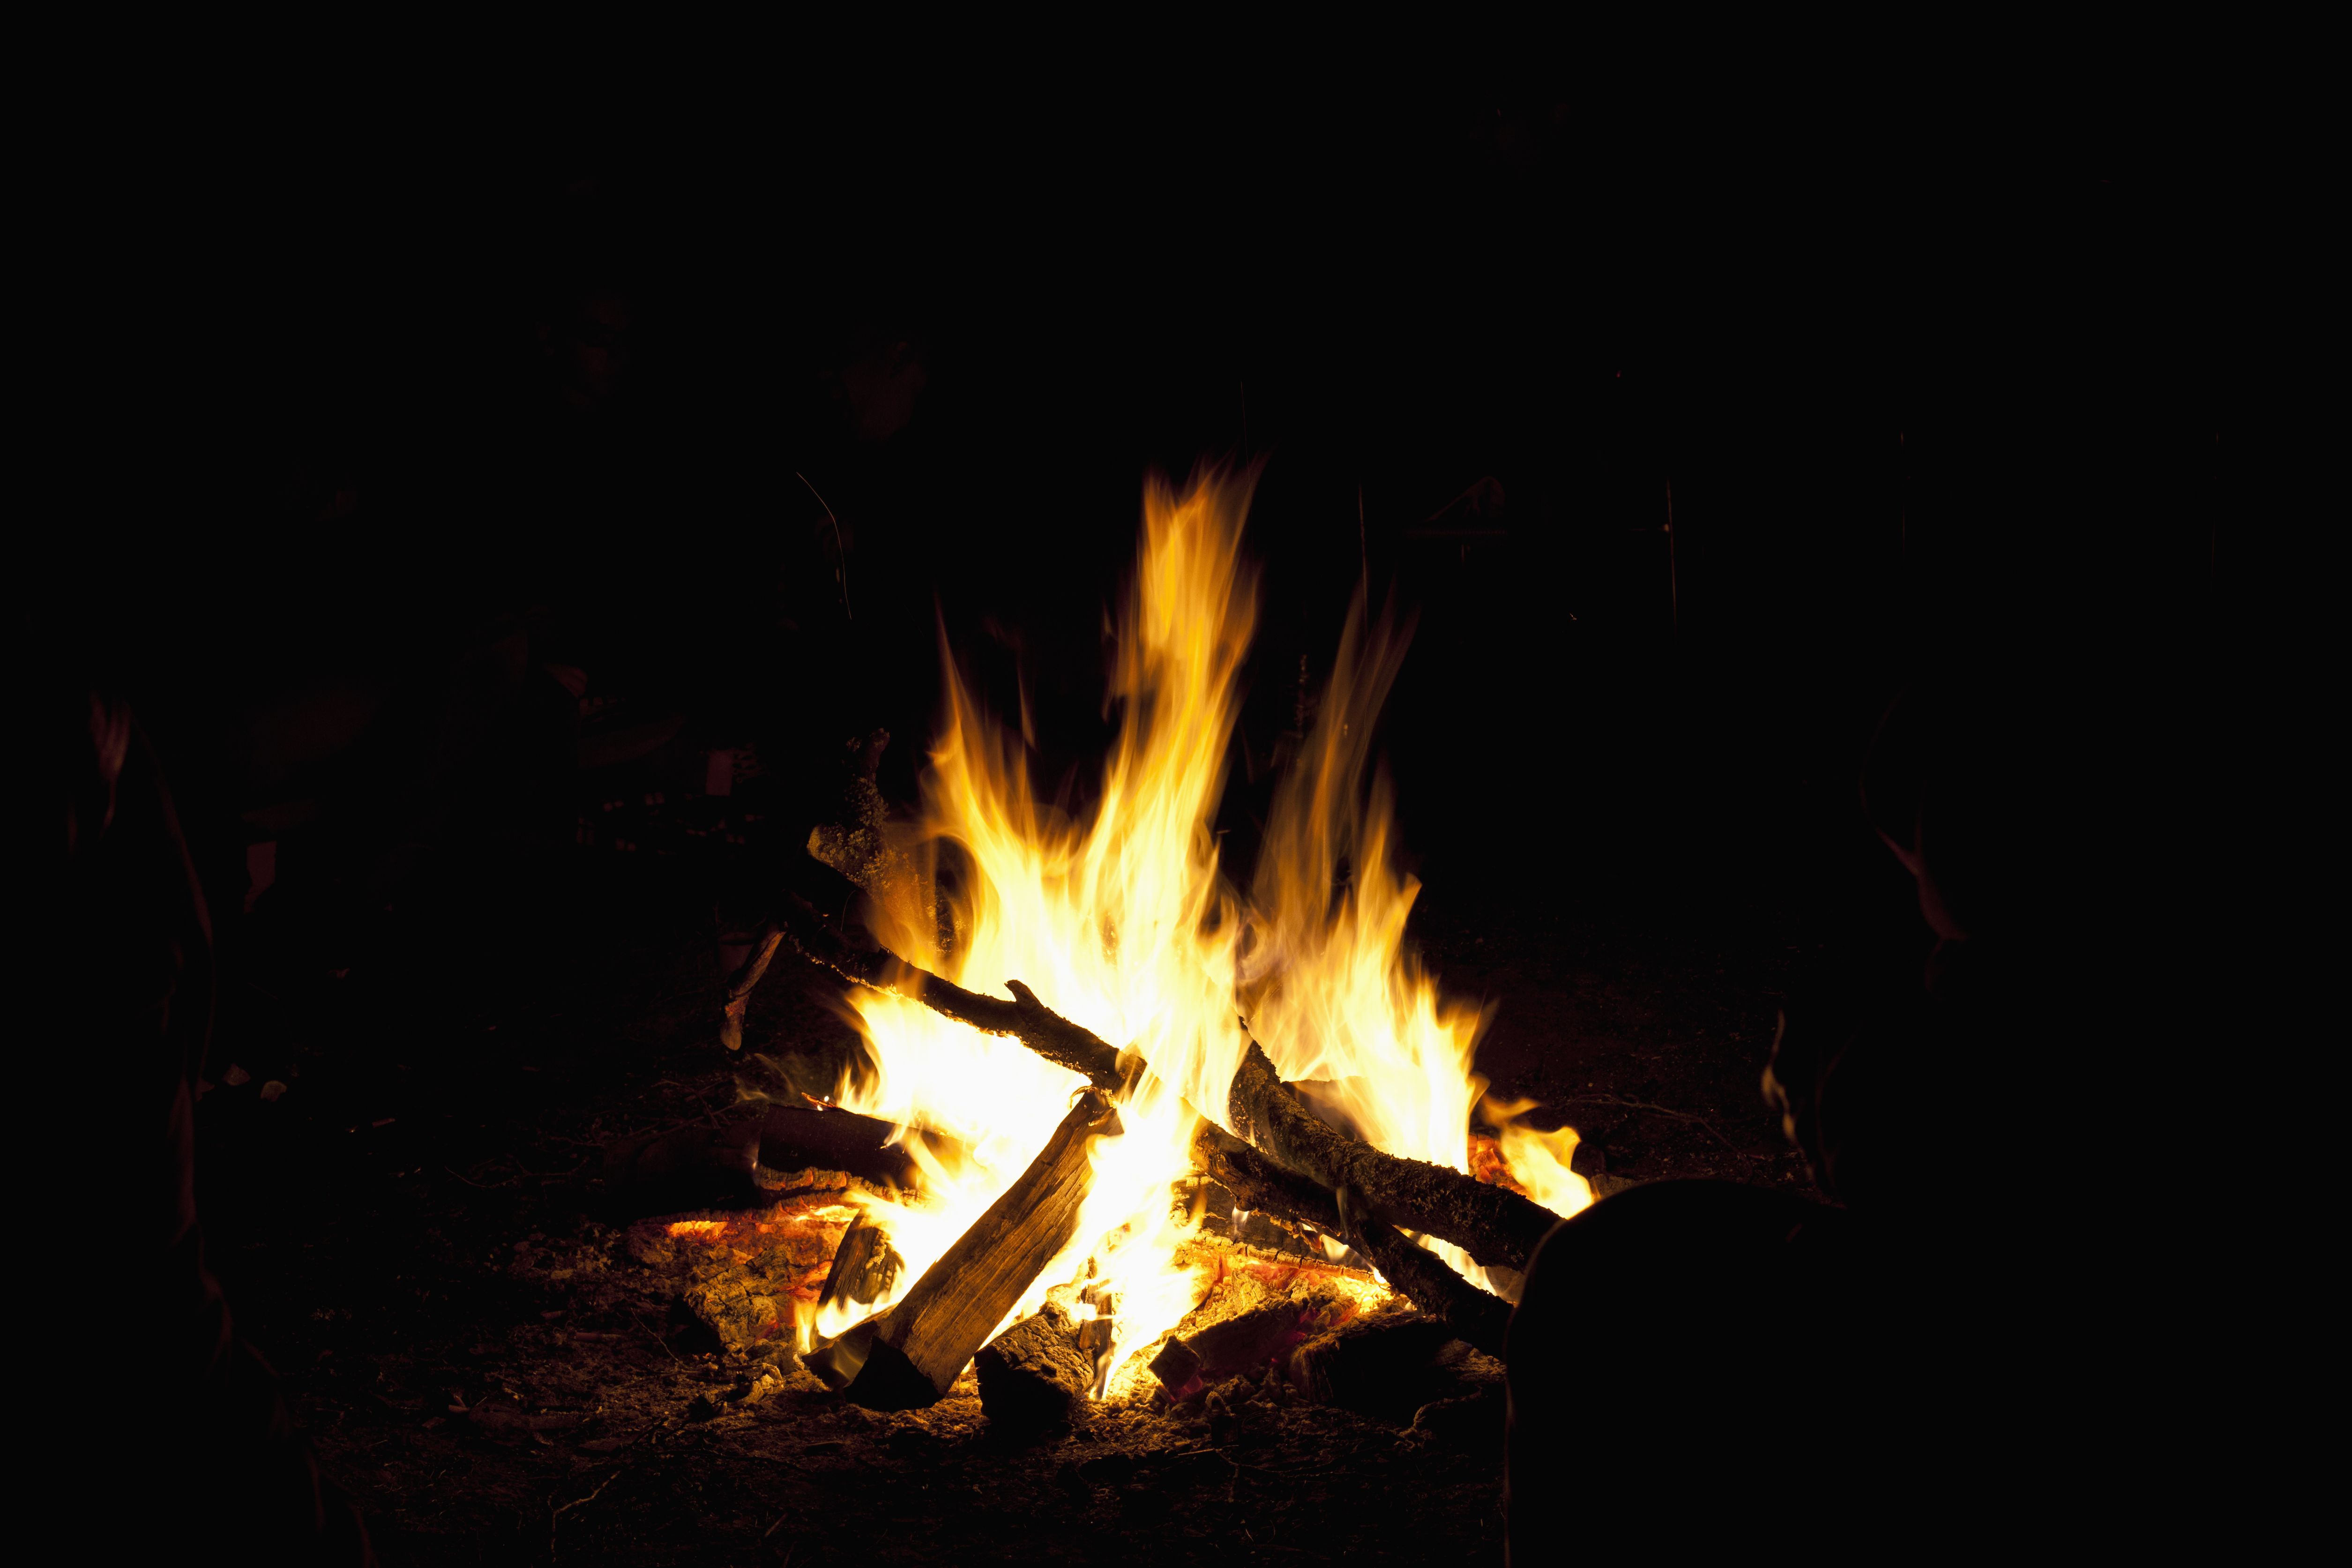 How To Build A Fire Pit Easily In 8 Steps, Starting A Fire In A Fire Pit